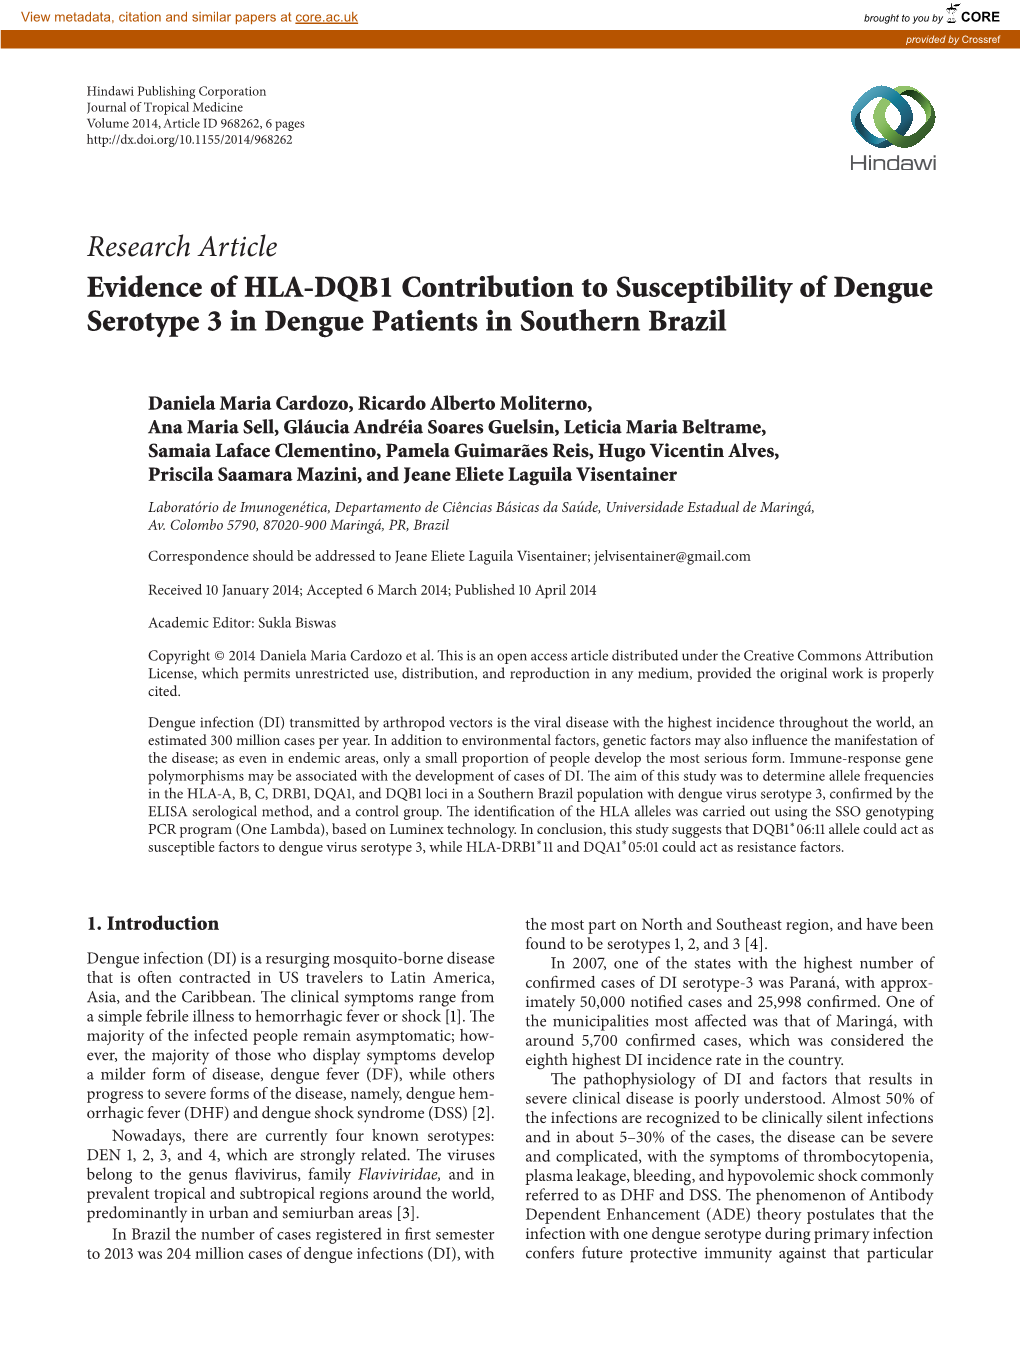 Evidence of HLA-DQB1 Contribution to Susceptibility of Dengue Serotype 3 in Dengue Patients in Southern Brazil